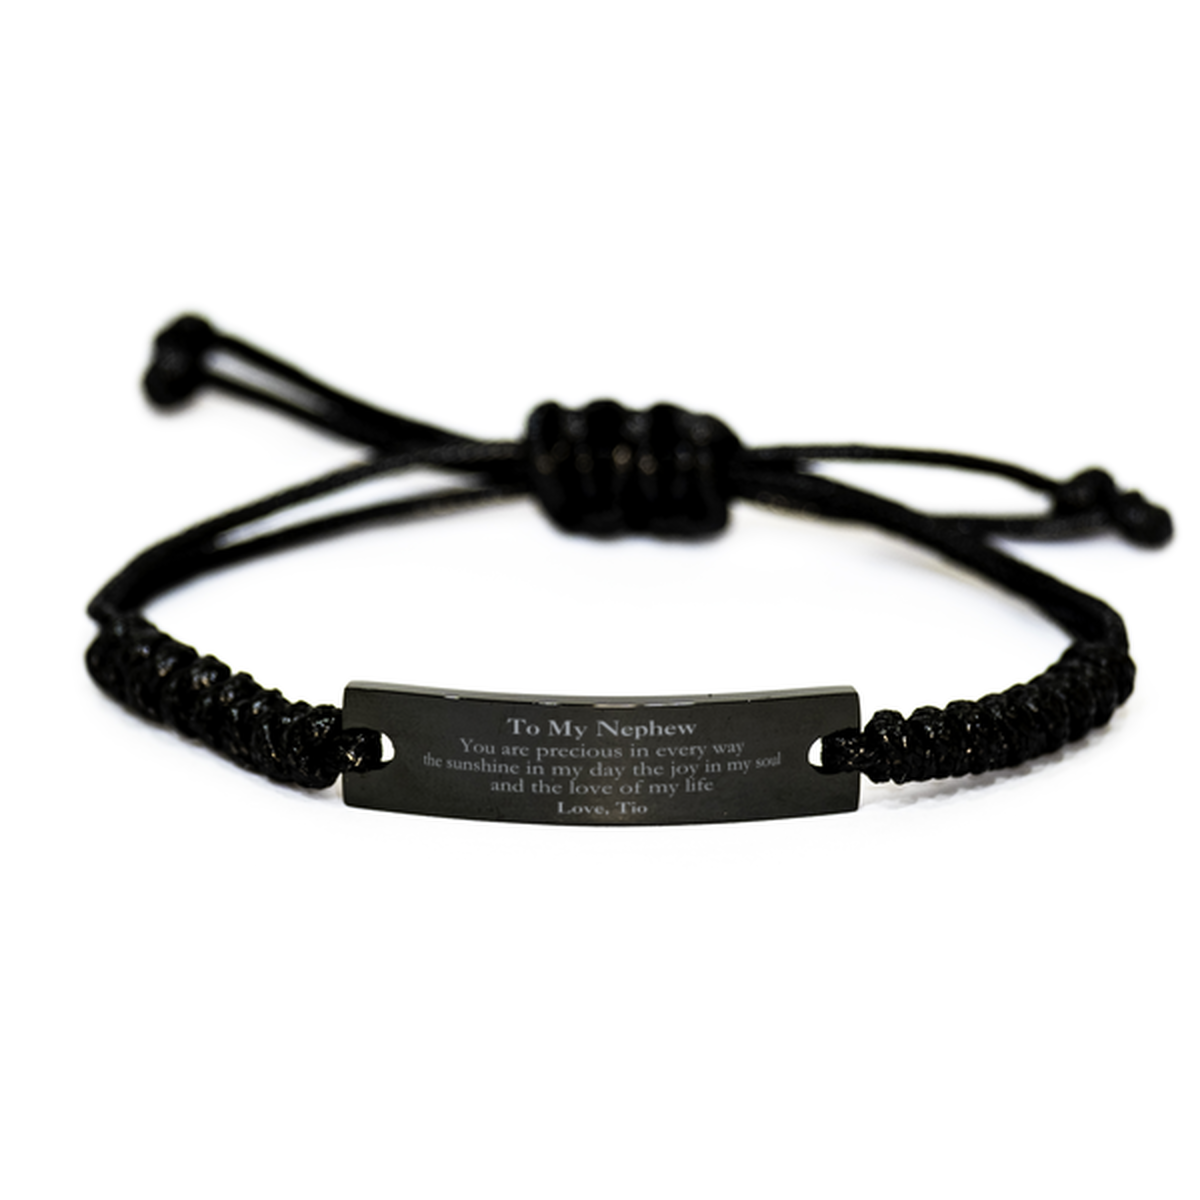 Graduation Gifts for Nephew Black Rope Bracelet Present from Tio, Christmas Nephew Birthday Gifts Nephew You are precious in every way the sunshine in my day. Love, Tio